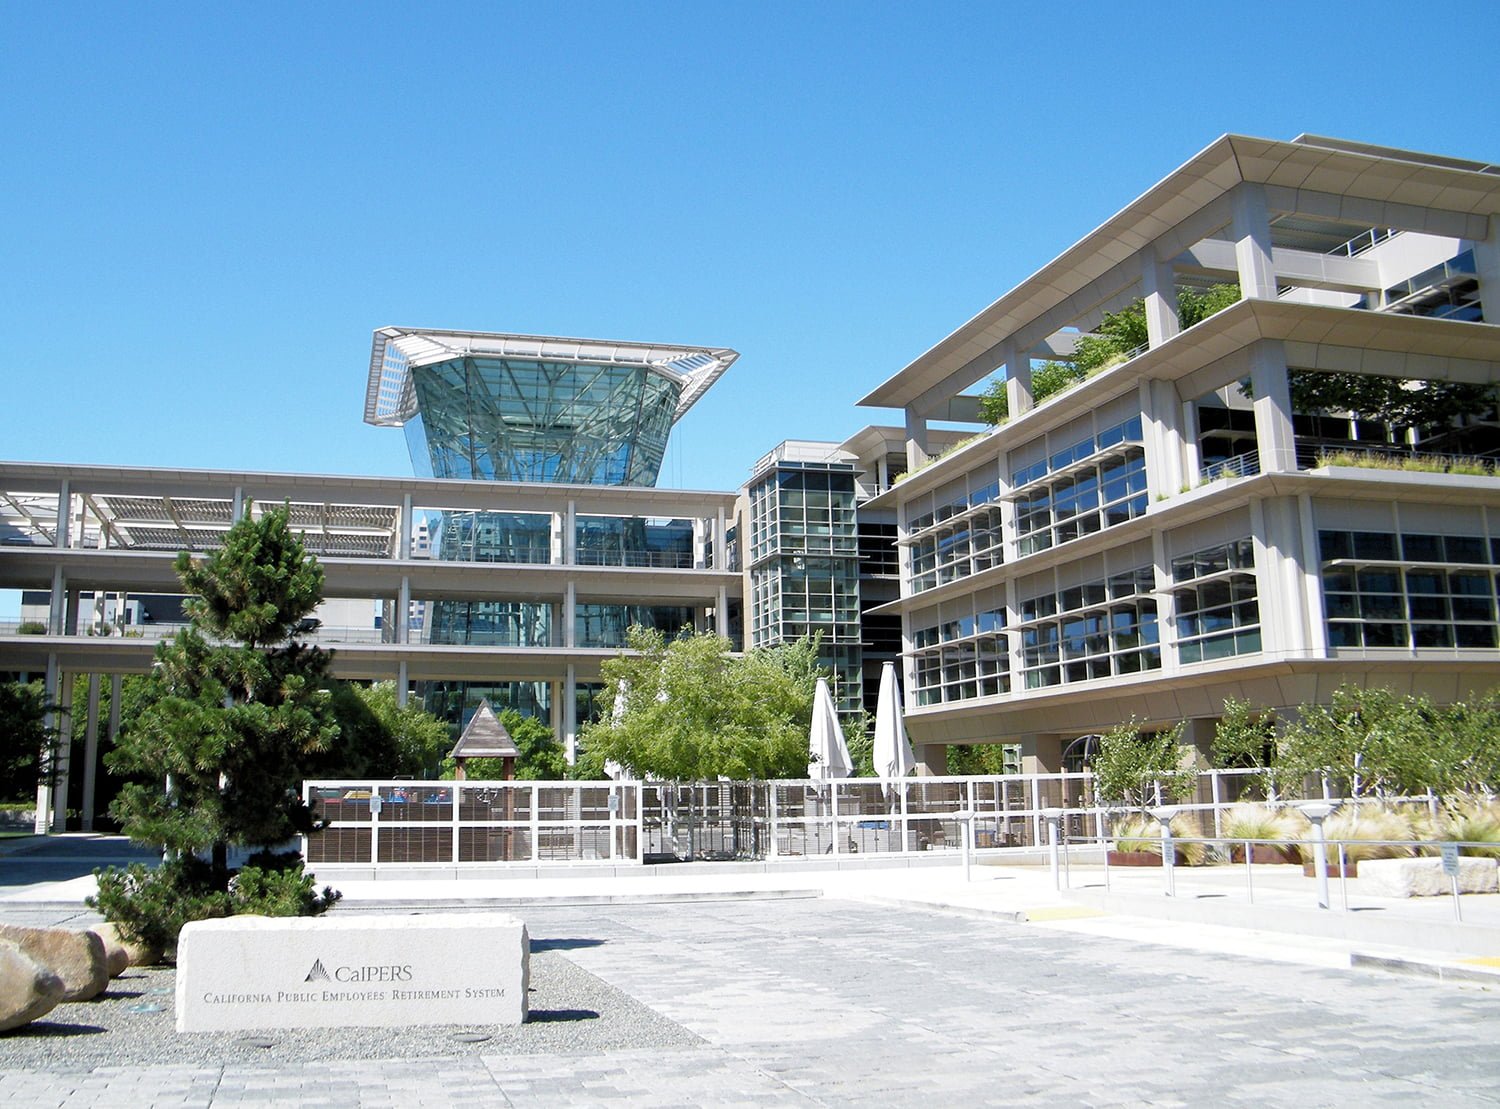 Photo of CalPERS headquarters by Coolcaesar at English Wikipedia